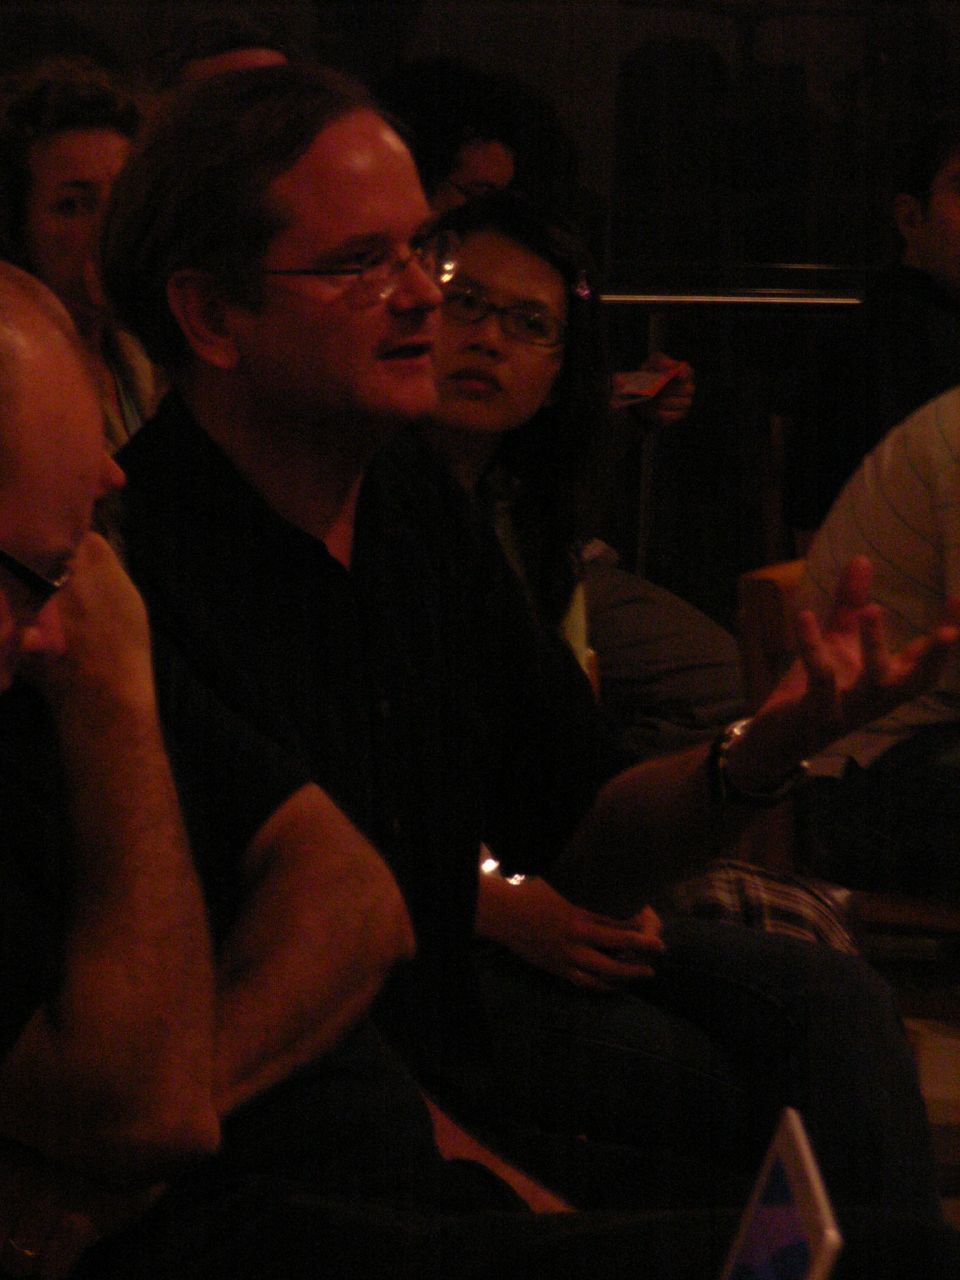 a man with glasses sitting on a chair with other people